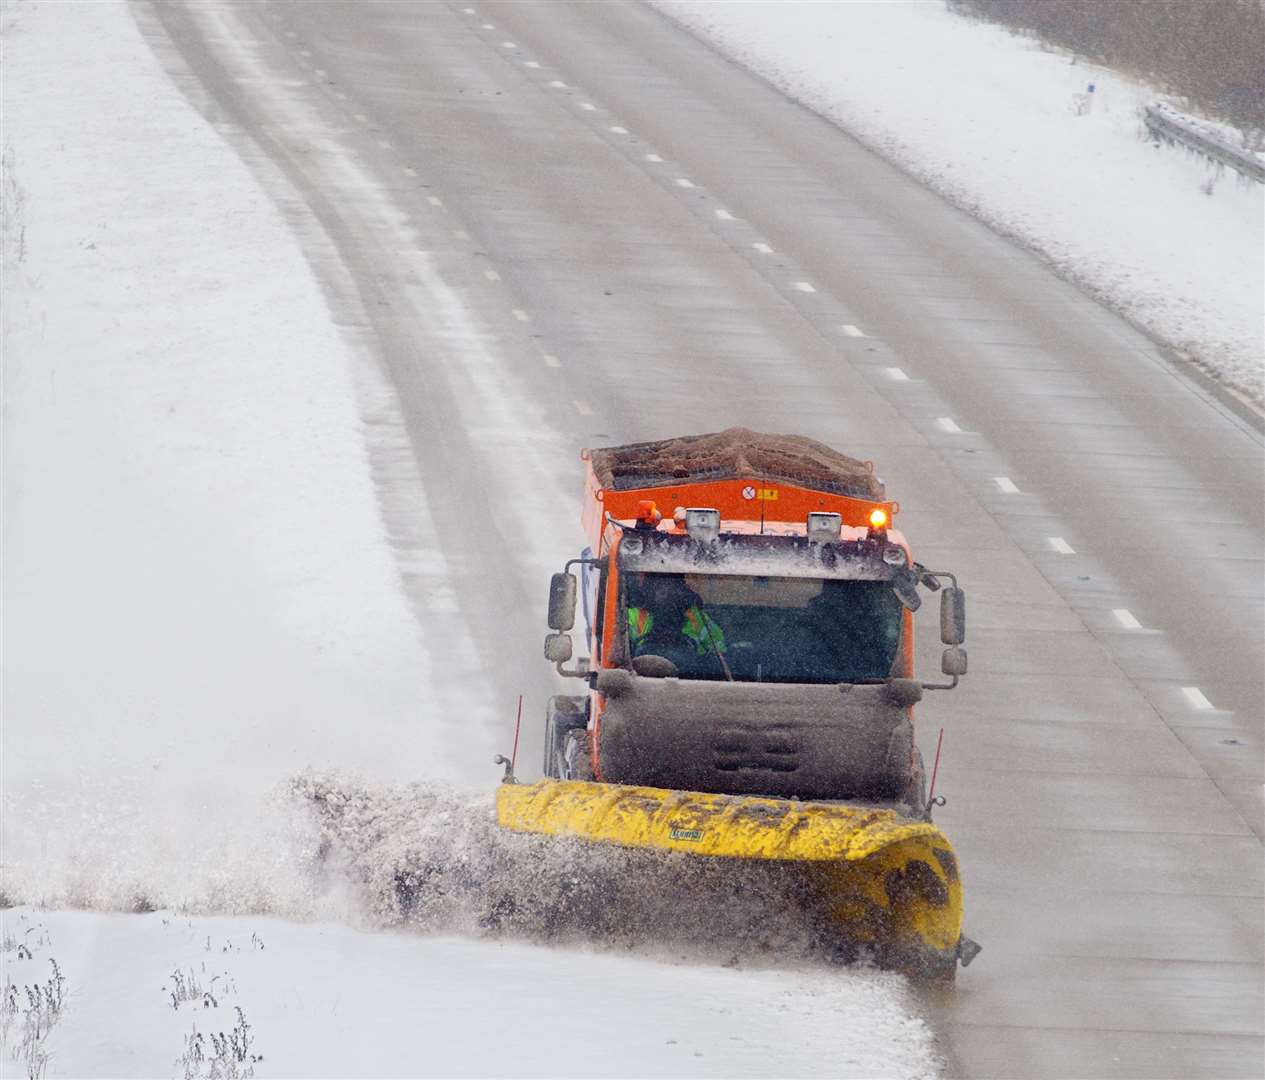 National Highways says it is ready for its first winter runs